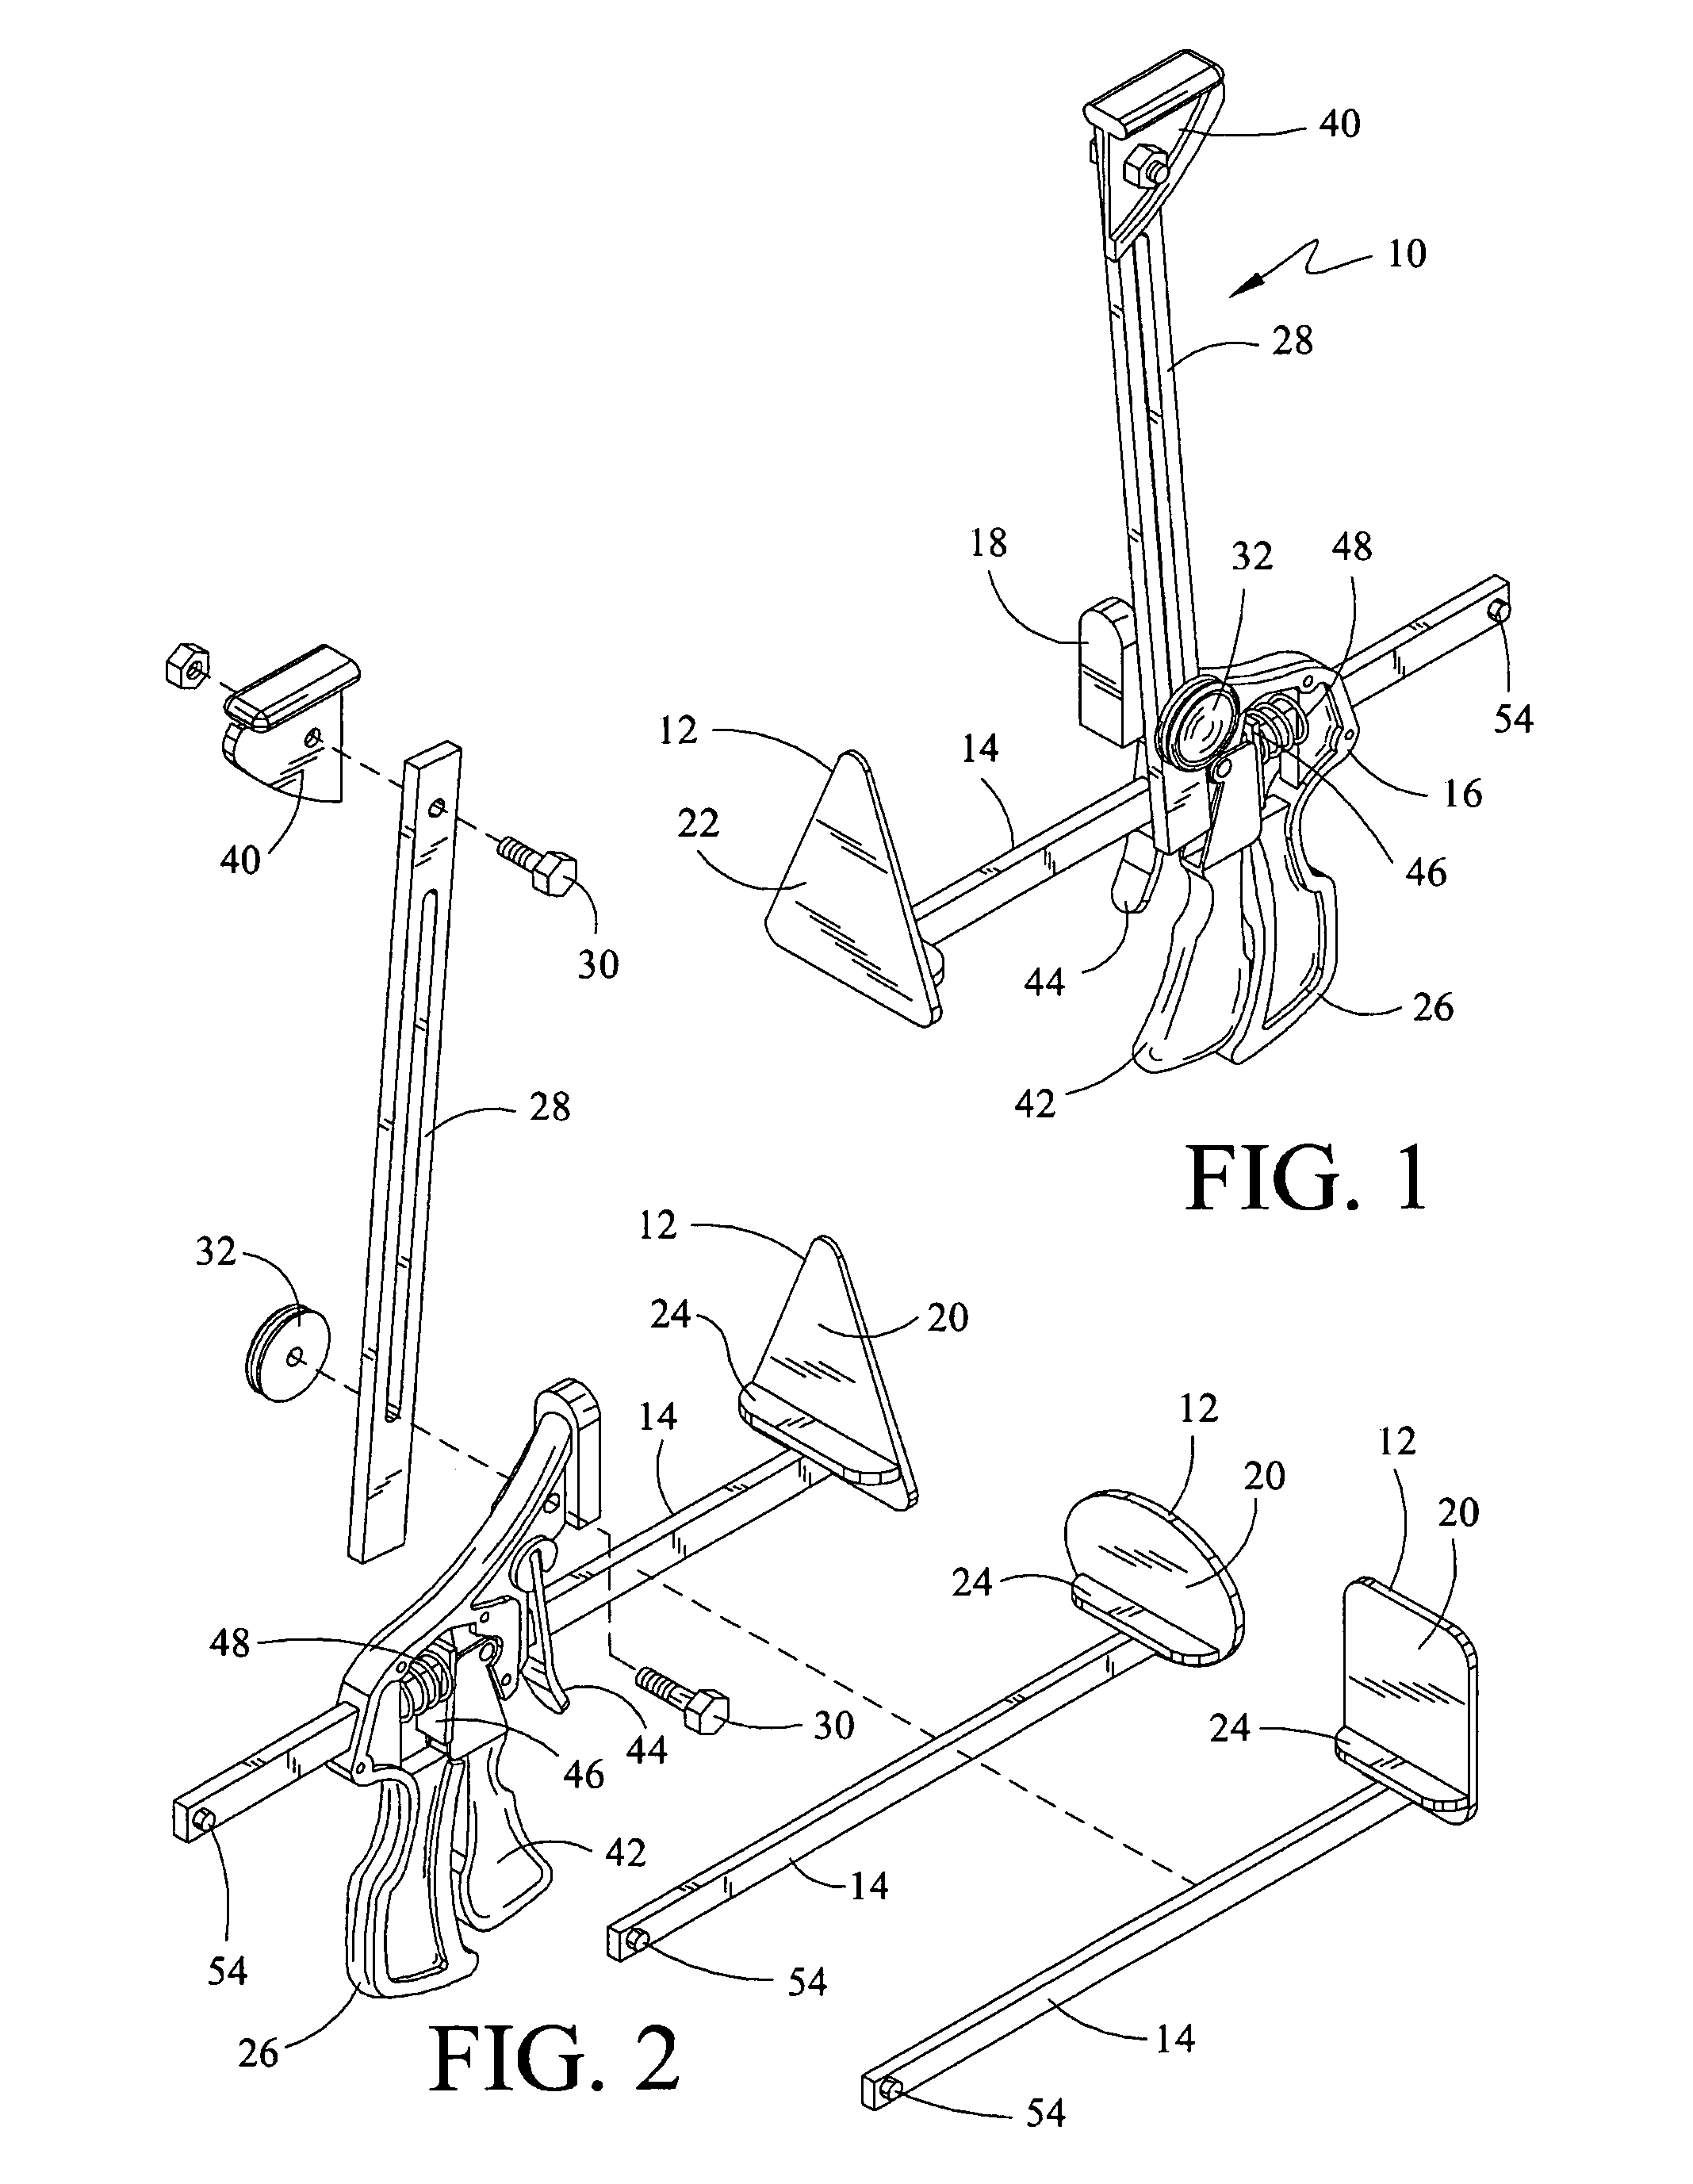 Hand tool apparatus and method